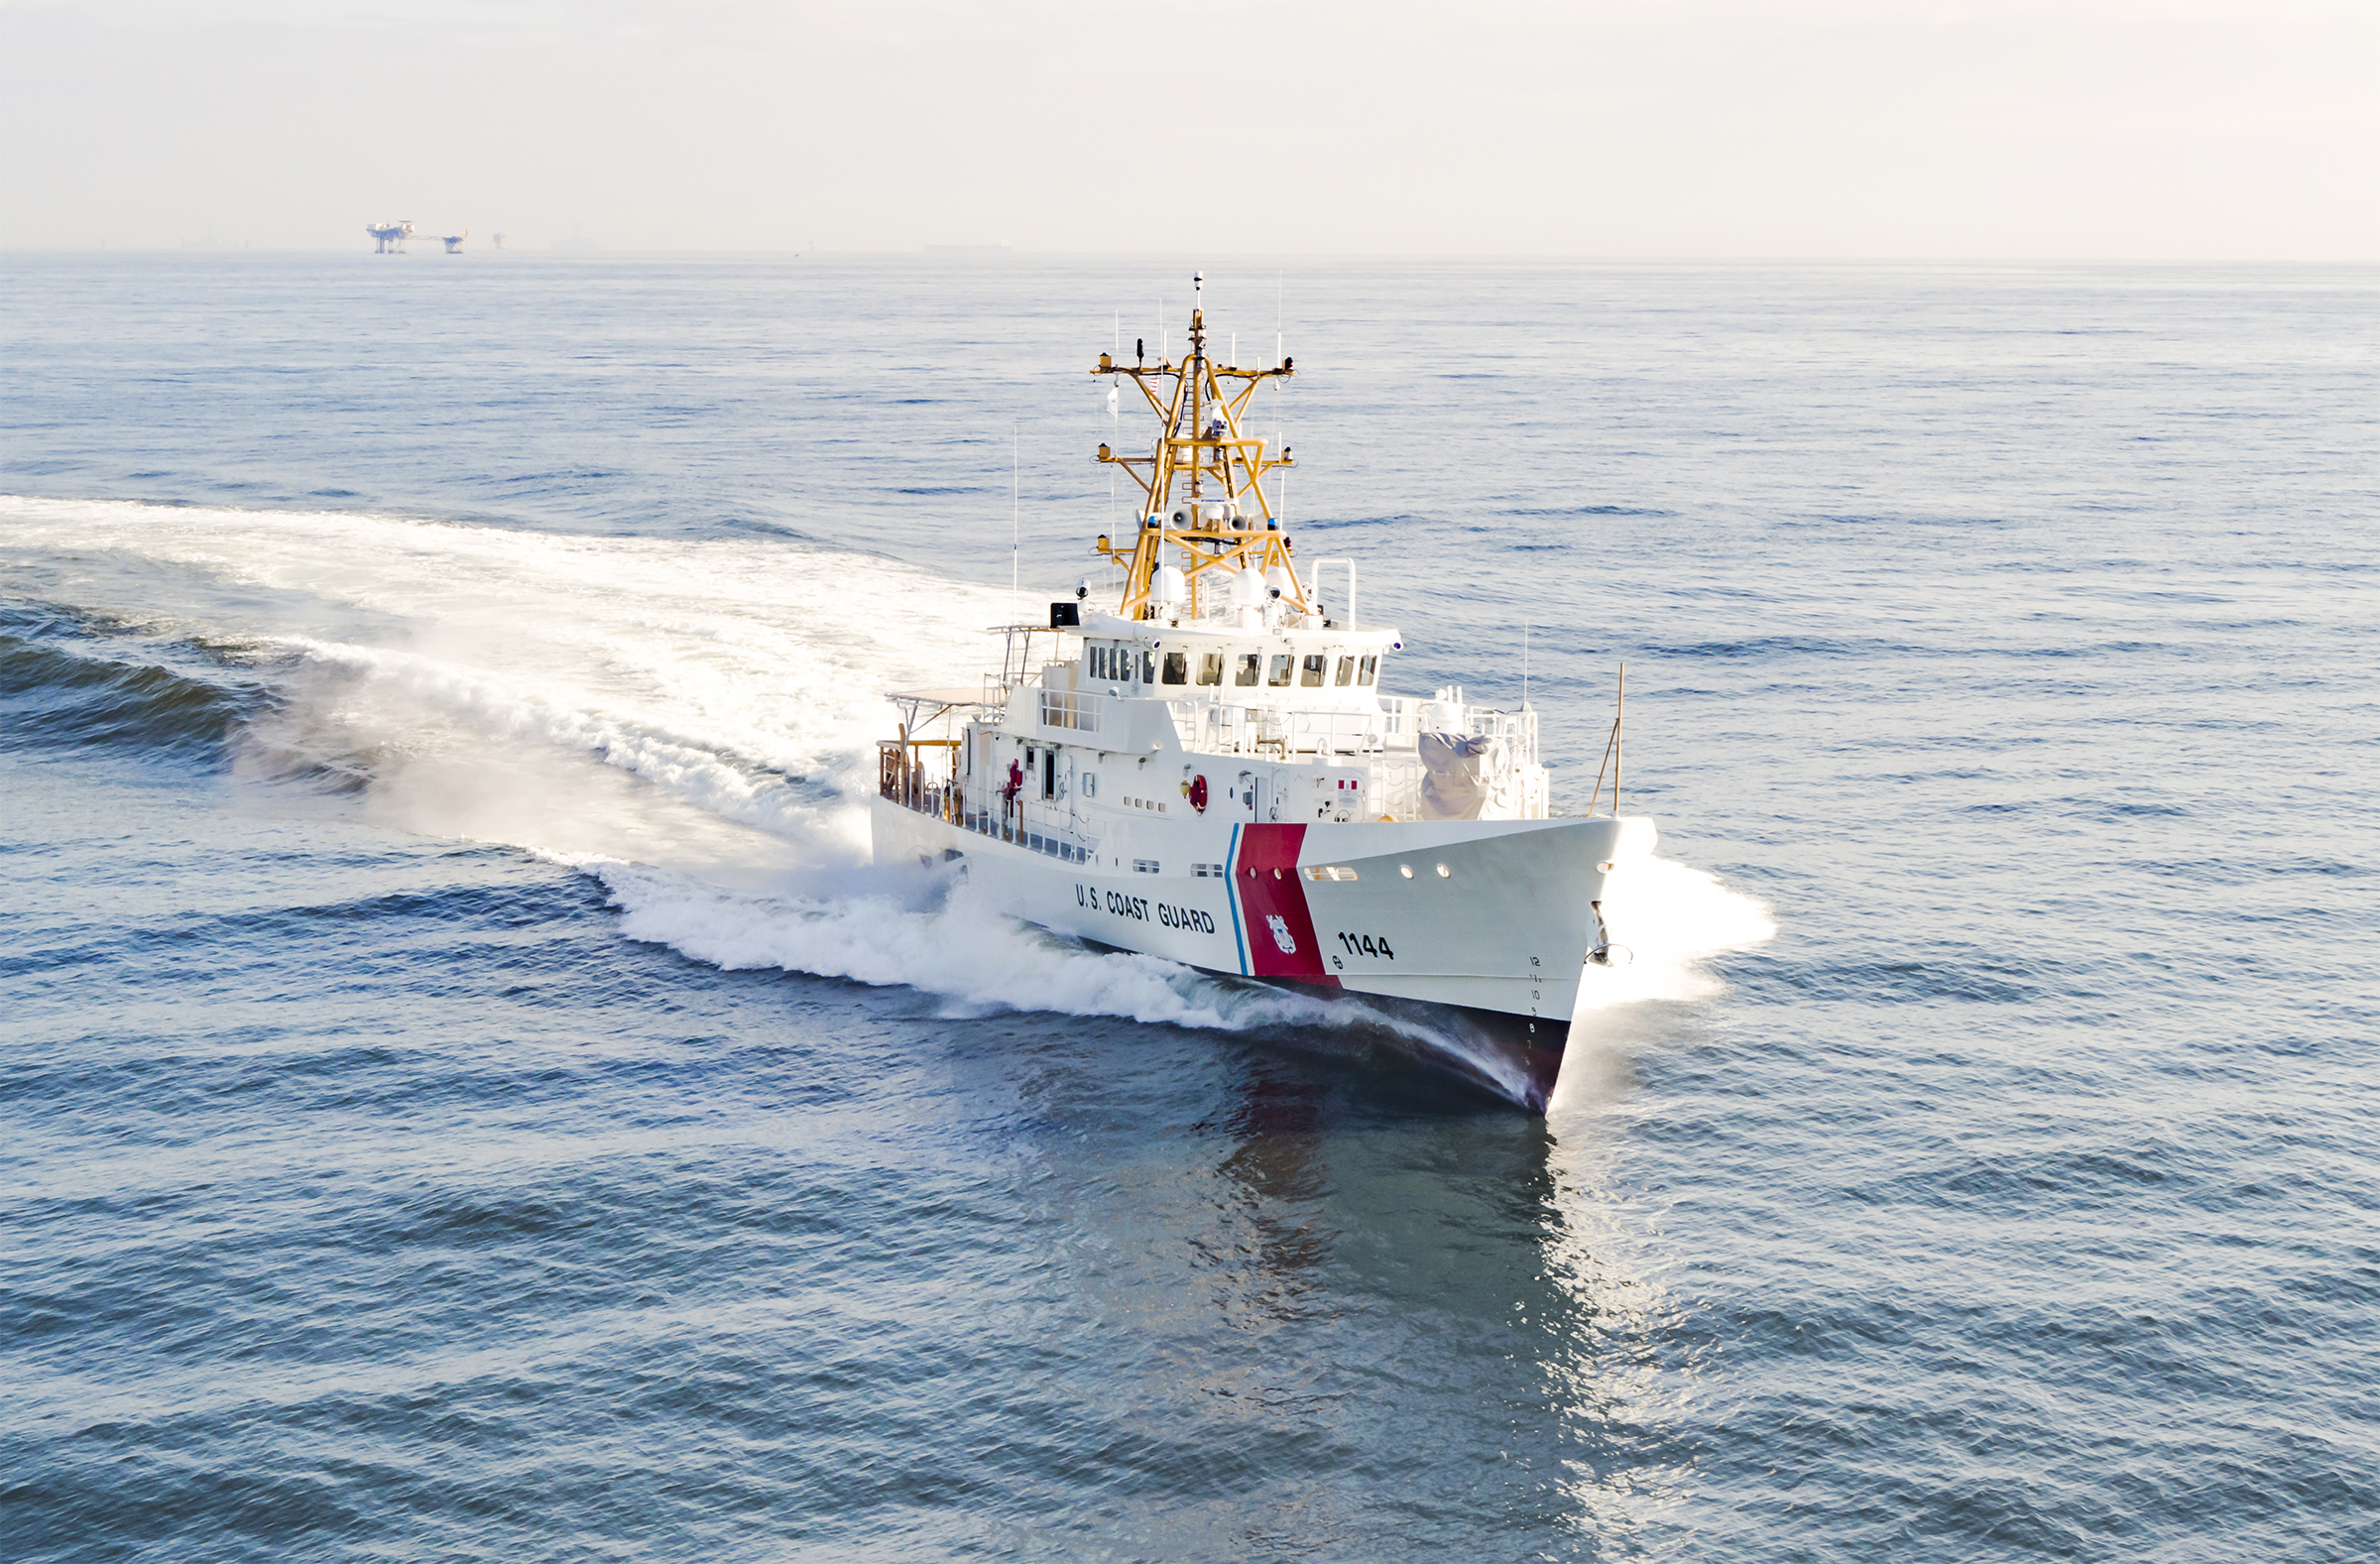 Bollinger Shipyards Delivers 44th Fast Response Cutter Strengthening Defense Capabilities In The Arabian Gulf